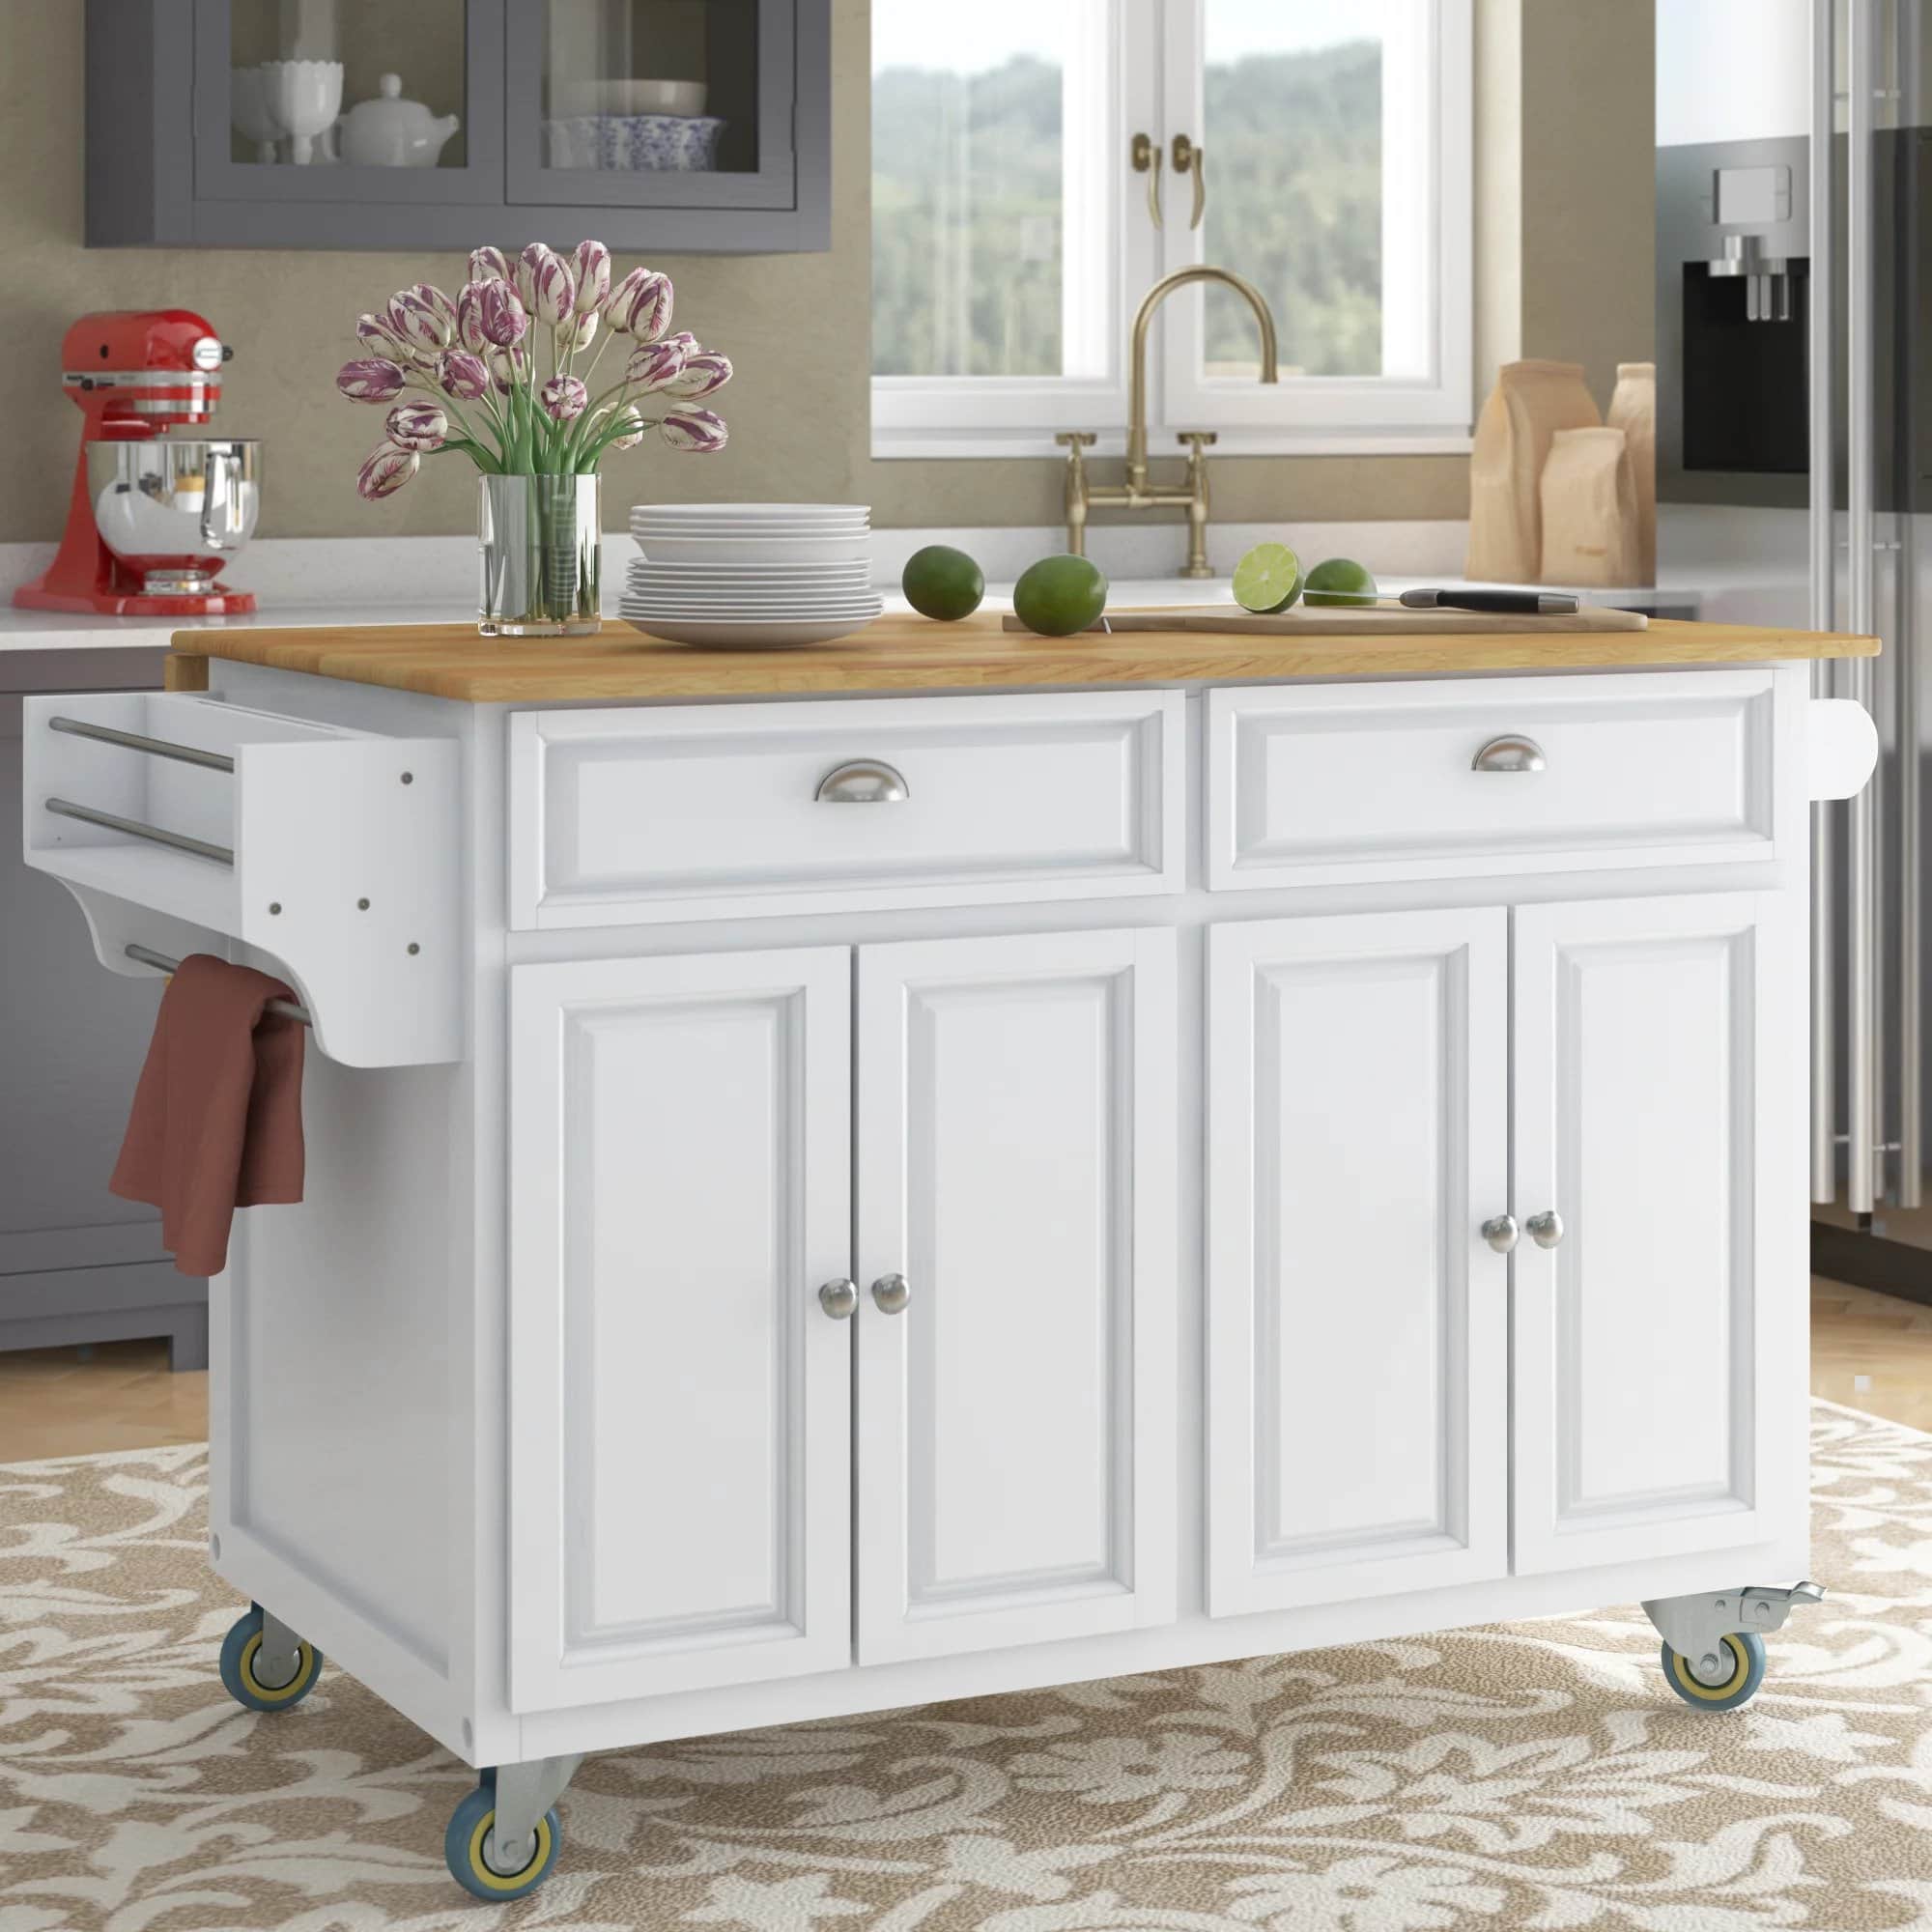 Gorgeous kitchen island on wheels, acts as a furniture for kitchen. storage, white coloured island, faucets